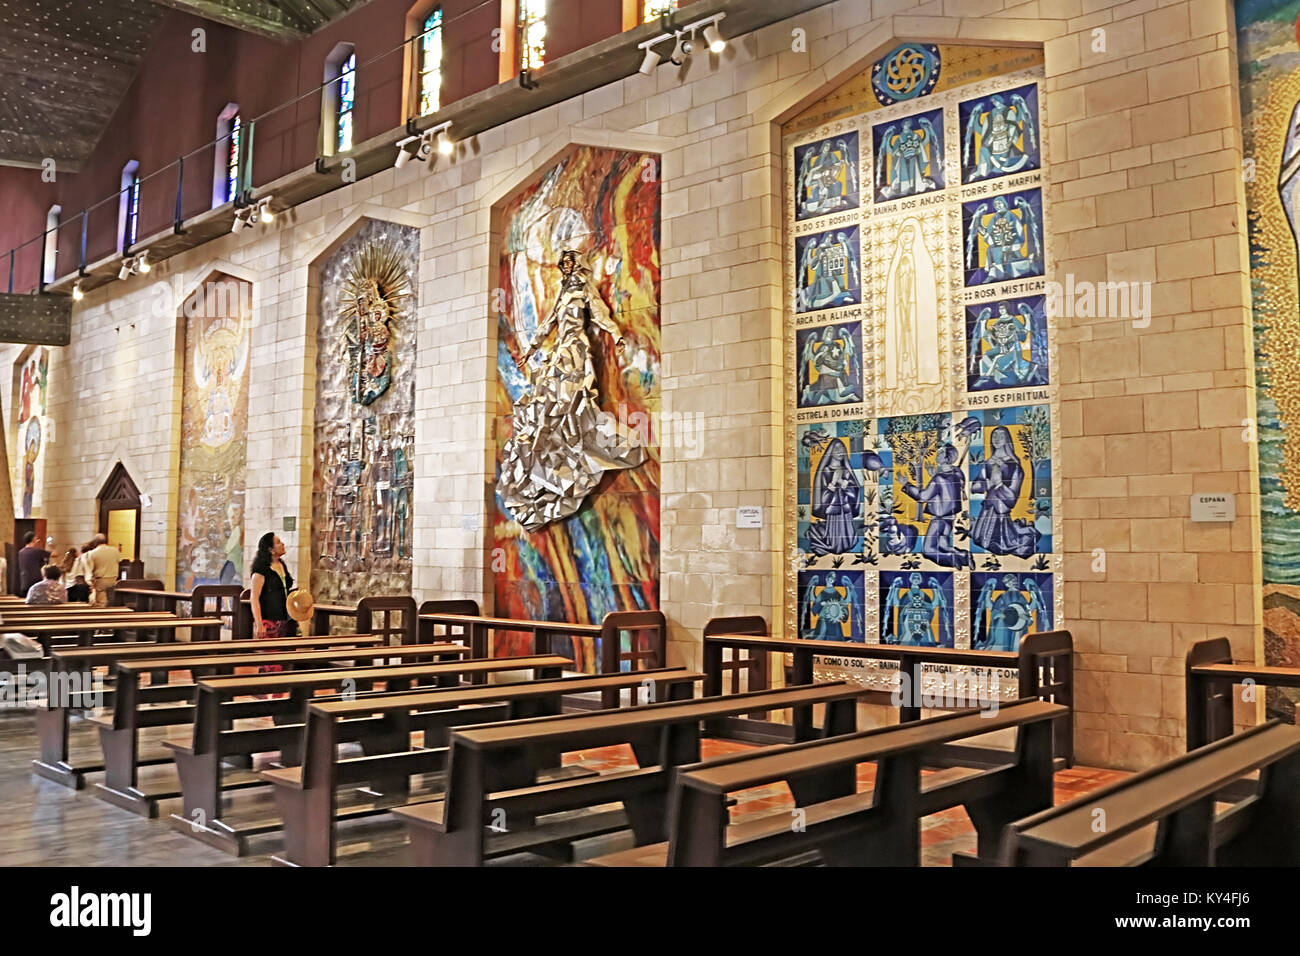 NAZARETH, ISRAEL - SEPTEMBER 21, 2017: Interior of the Basilica of the Annunciation or Church of the Annunciation in Nazareth, Israel Stock Photo